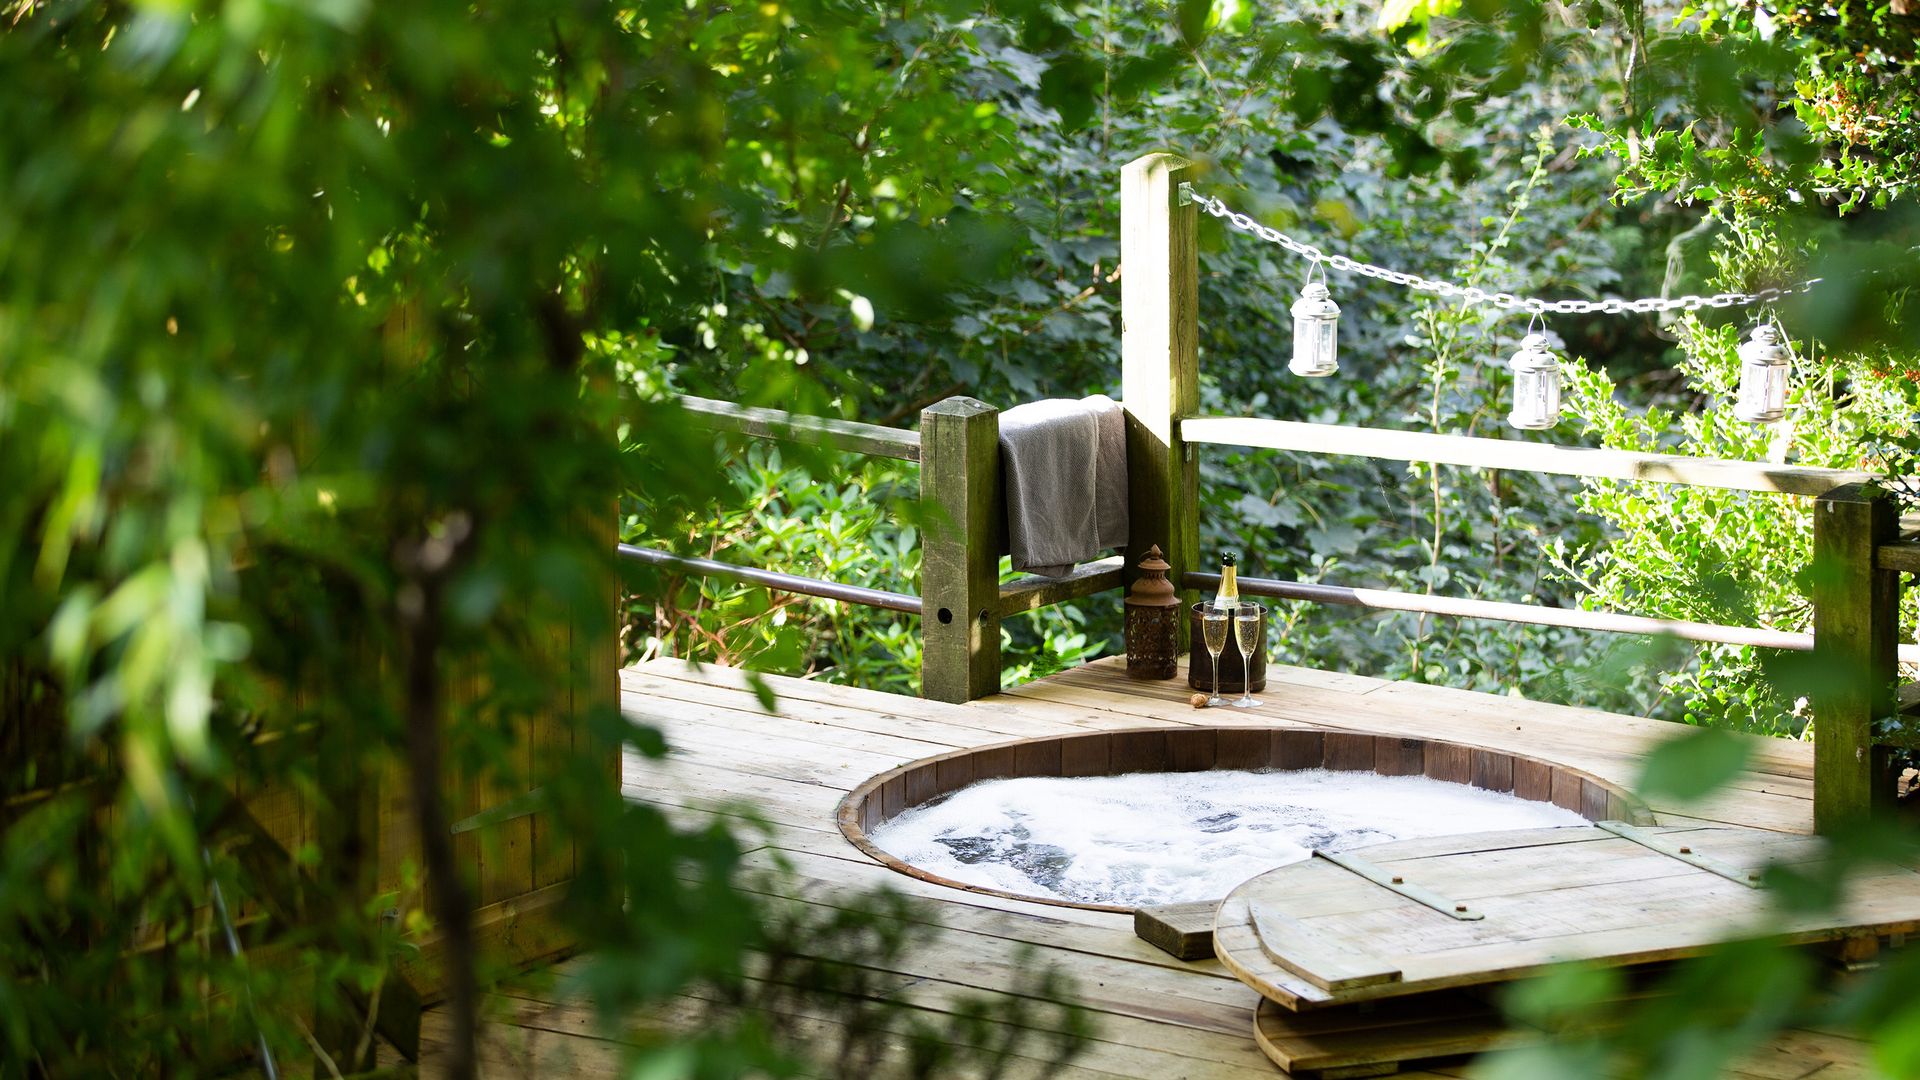 <p>                     Our hot tub ideas are just what you need if you're wondering how to create the perfect garden retreat.                   </p>                                      <p>                     After all, we could all do with a little more 'me time'. Imagine if you could just step outside, jump into your own private tub and drift away into a bubbling bath of serenity after a long day. It's no surprise that everyone wants a hot tub.                   </p>                                      <p>                     ‘Hot tubs give people the chance to unwind in indulgent surroundings; the chance to escape the everyday and feel a sense of freedom whilst leaving the screens behind,' says the team at the seaside holiday accommodation company, Luxury Coastal. What's more, there are so many styles to go for, from sleek and contemporary with all the mod-cons to rustic, back-to-basics models. 'The emergence of wood-fired hot tubs has seen beautifully crafted pieces dotted throughout the wilderness, helping people to reconnect to the great outdoors,' the team adds.                   </p>                                      <p>                     <em>BY HOLLY CROSSLEY</em>                   </p>